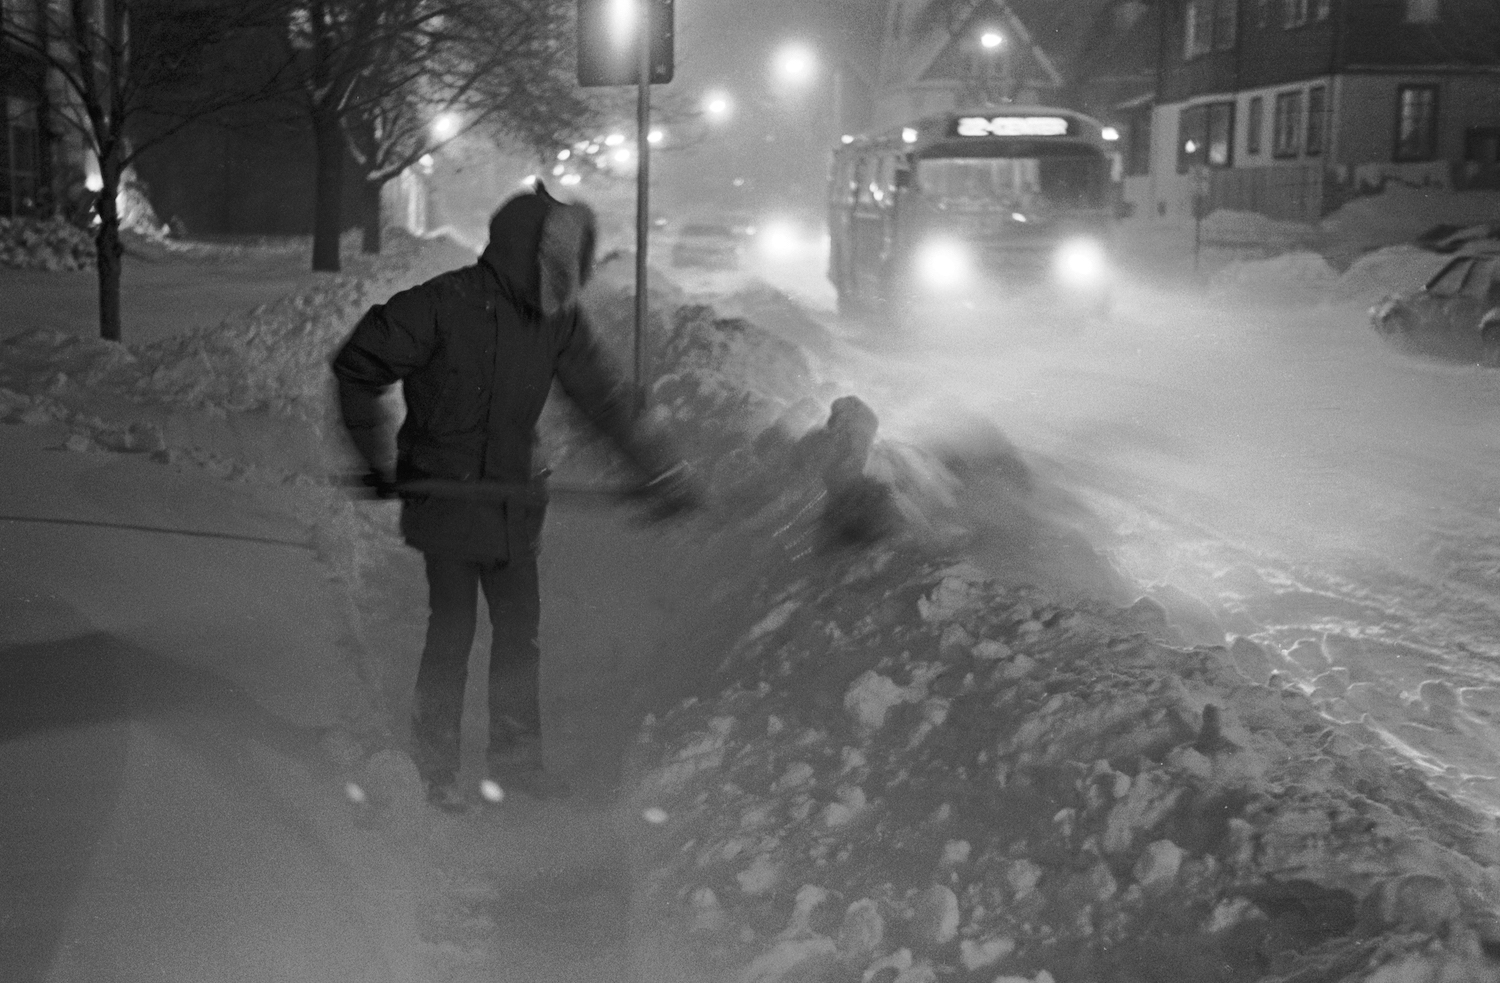 A figured bundled up against the cold shovels the sidewalk on a snowy night in December 1978.